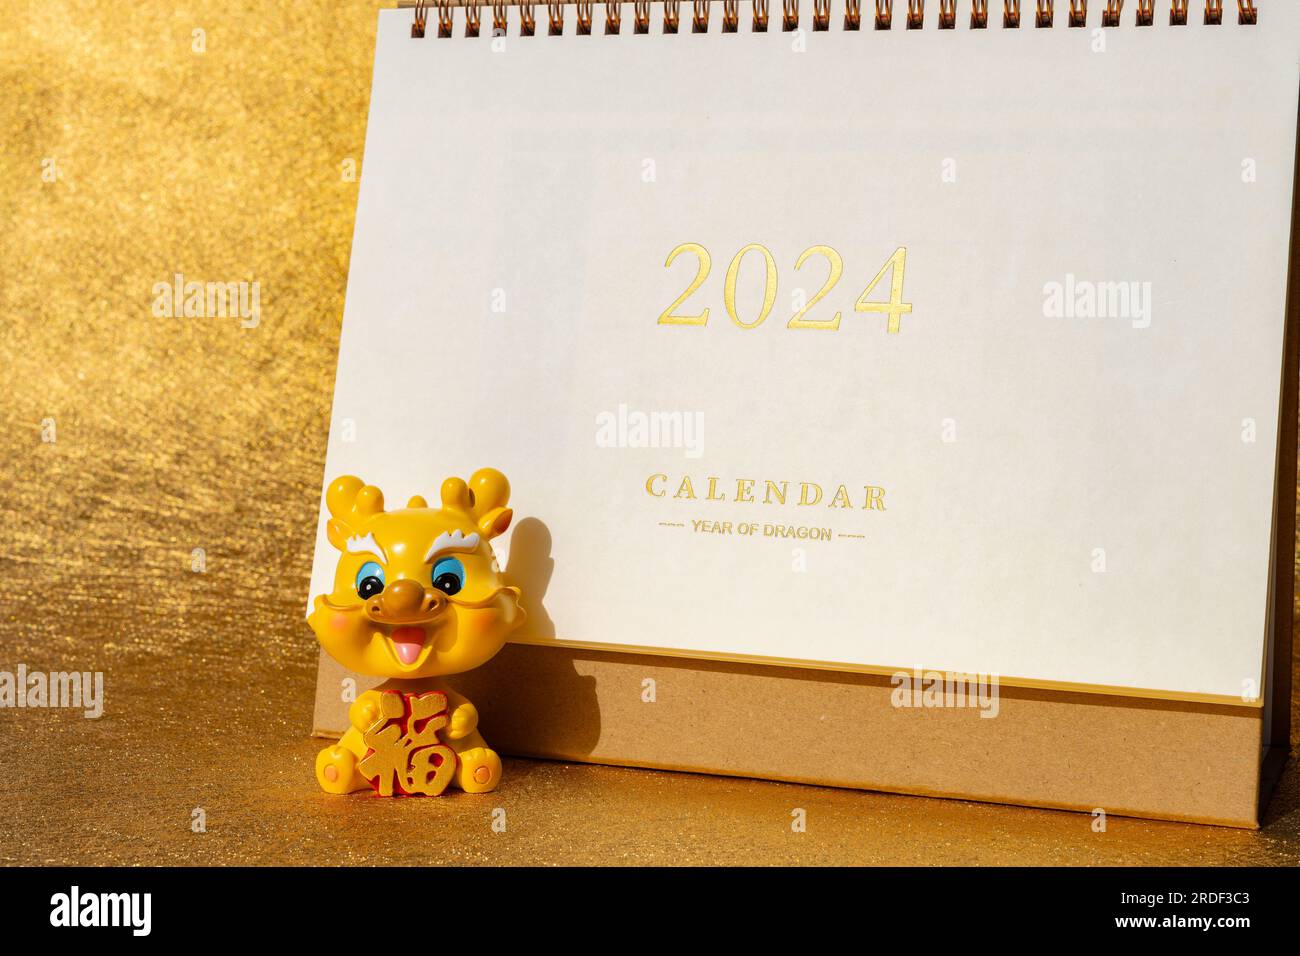 Year of Dragon mascot with a 2024 calendar at horizontal composition translation of the Chinese on the mascot is fortune no logo no trademark Stock Photo